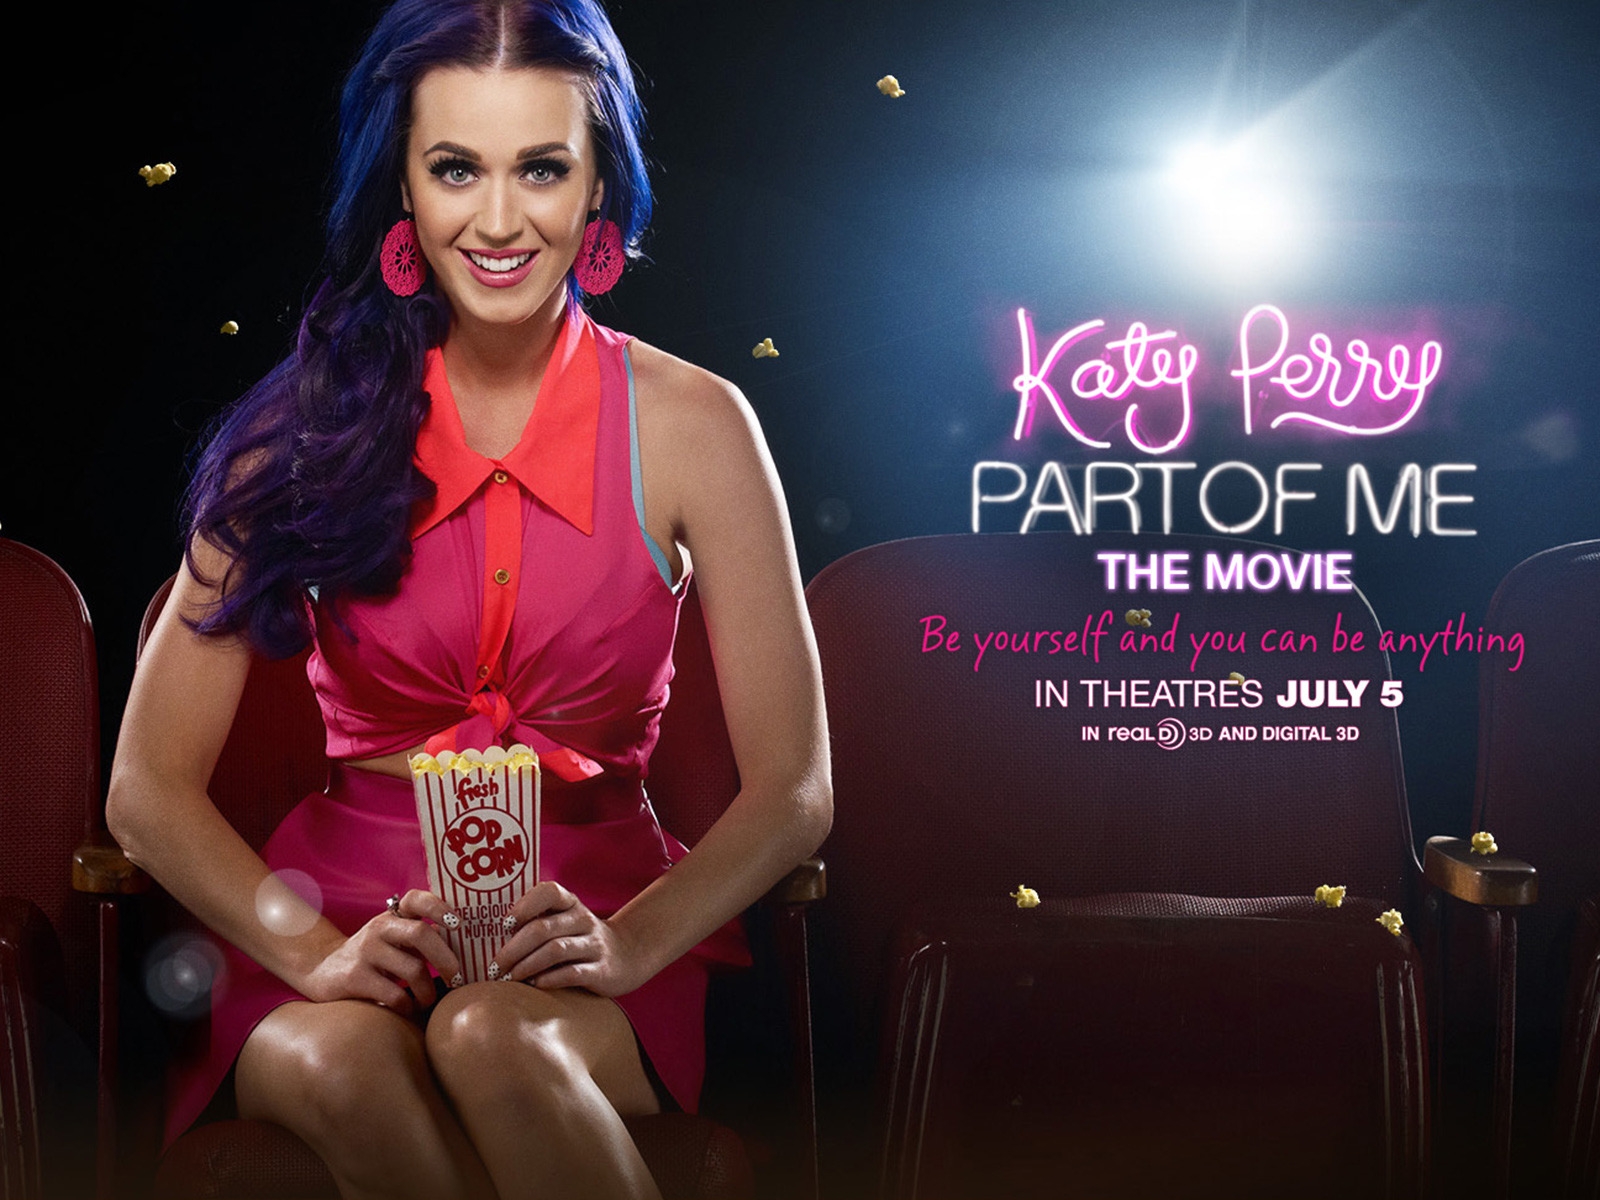 Katy Perry Part Of Me Movie 2012 for 1600 x 1200 resolution